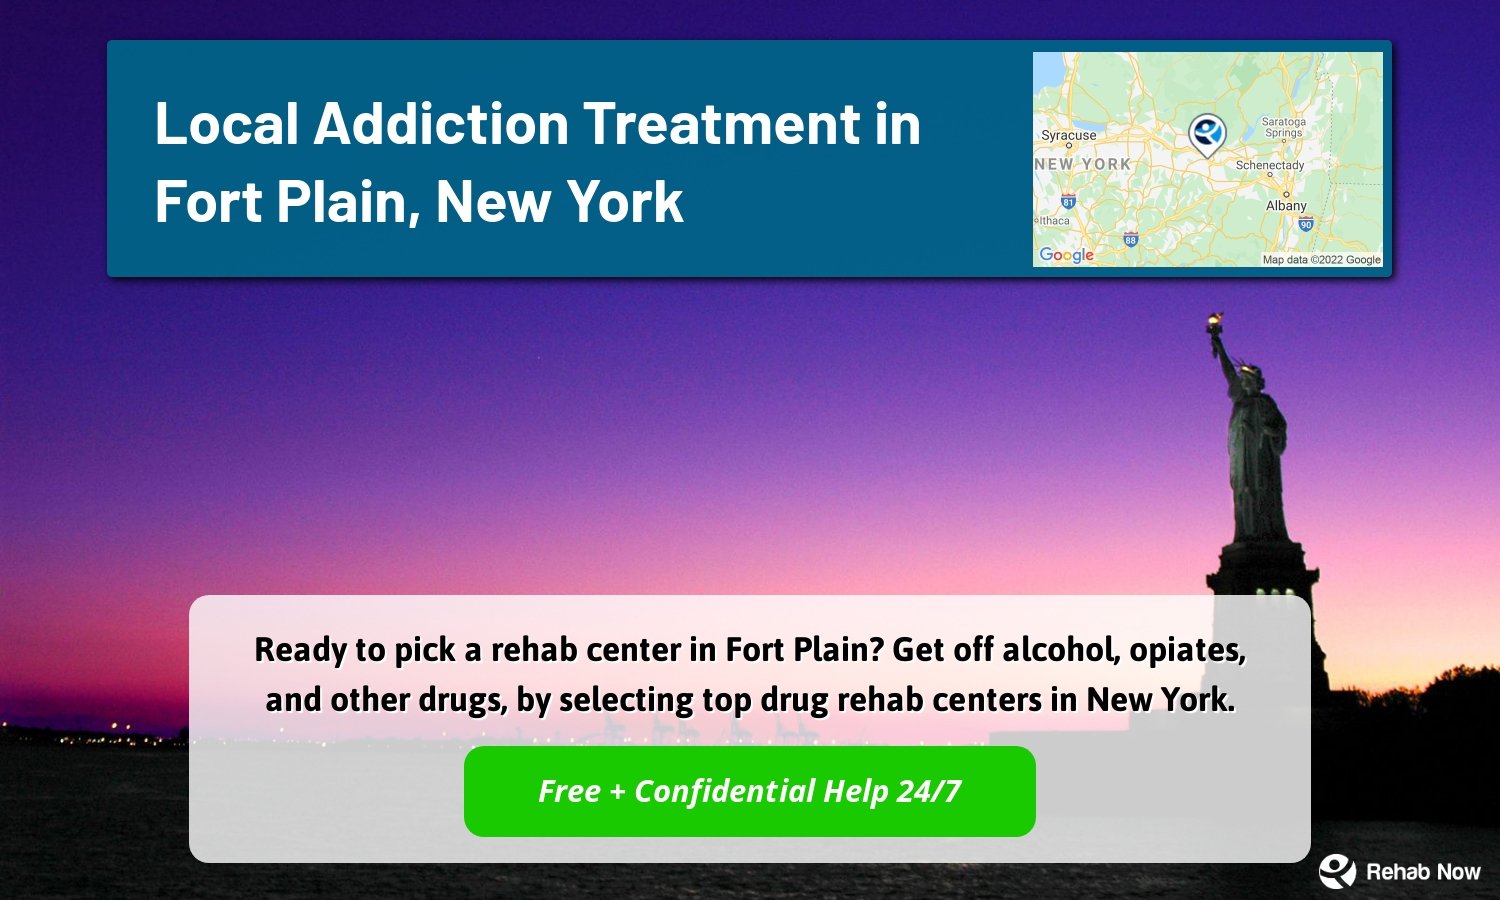 Ready to pick a rehab center in Fort Plain? Get off alcohol, opiates, and other drugs, by selecting top drug rehab centers in New York.